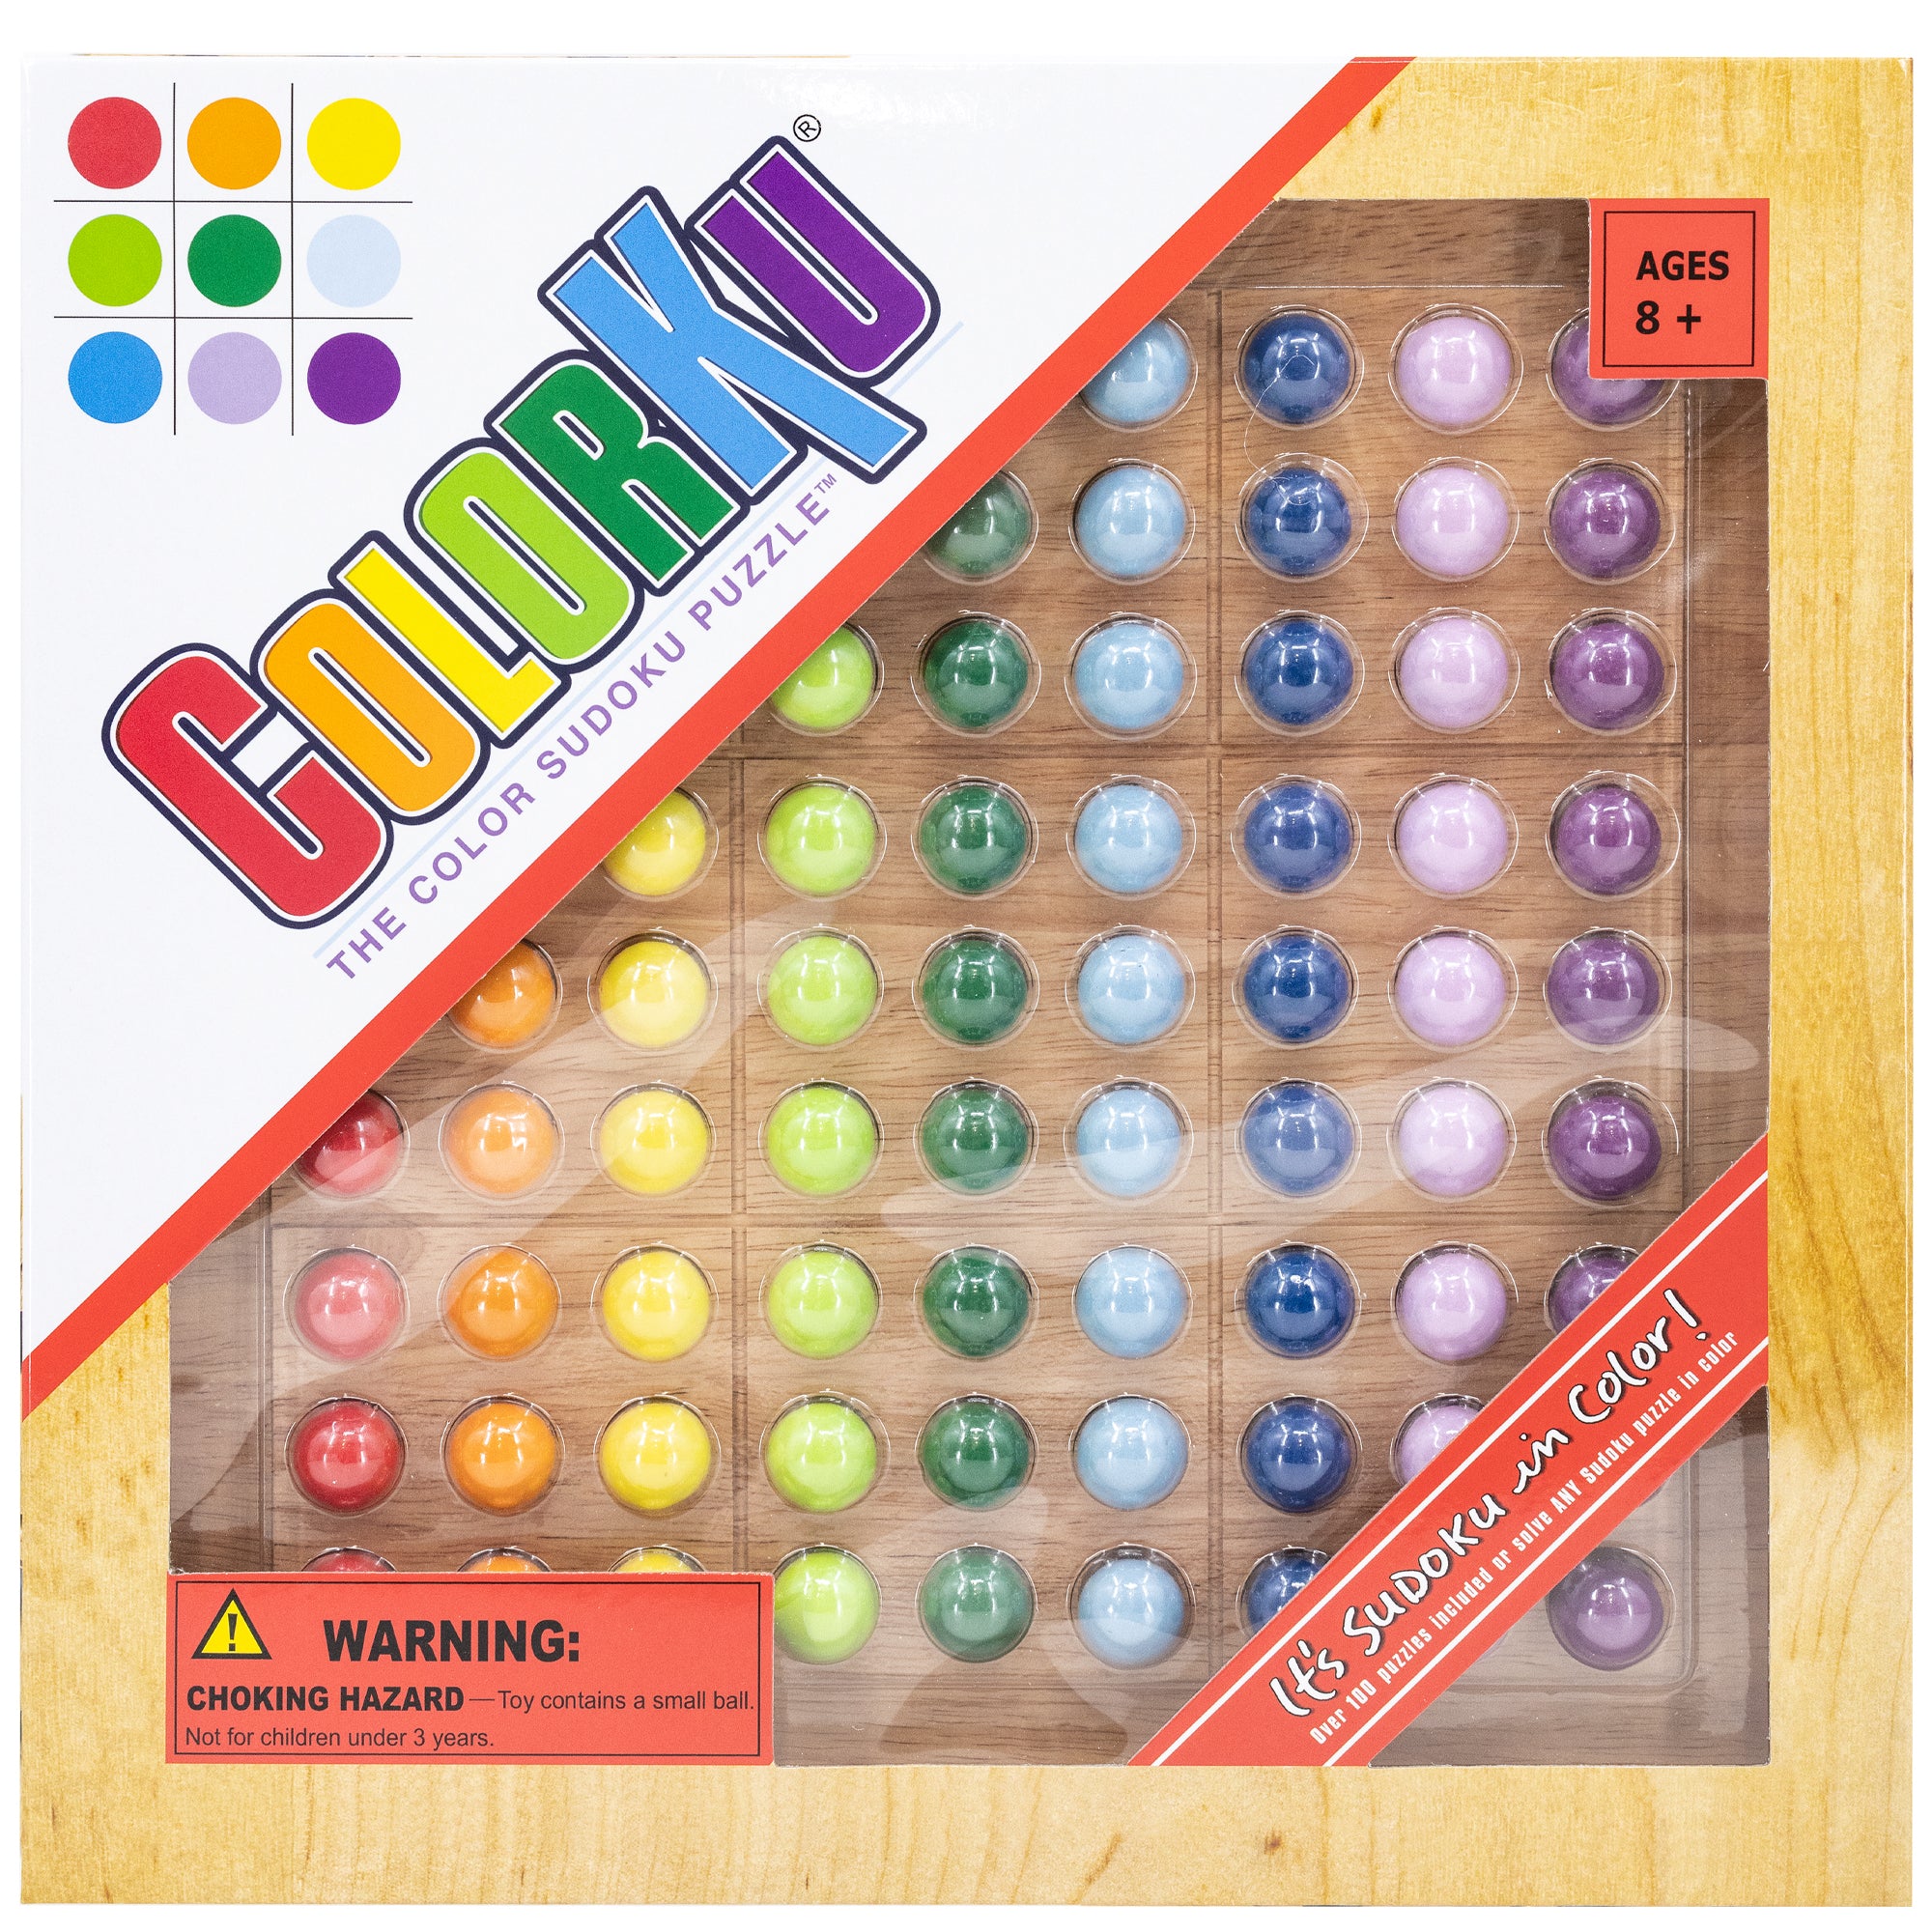 ColorKu packaging standing up to show the items inside. The title and logo are diagonally placed in the top-left. There is a wood-colored border around the outside and a large window on the rest of the top, showing the wooden game board with the pieces in place. The colored balls on the board are red, orange, yellow, bright green, dark green, light blue, dark blue, light purple, and dark purple.